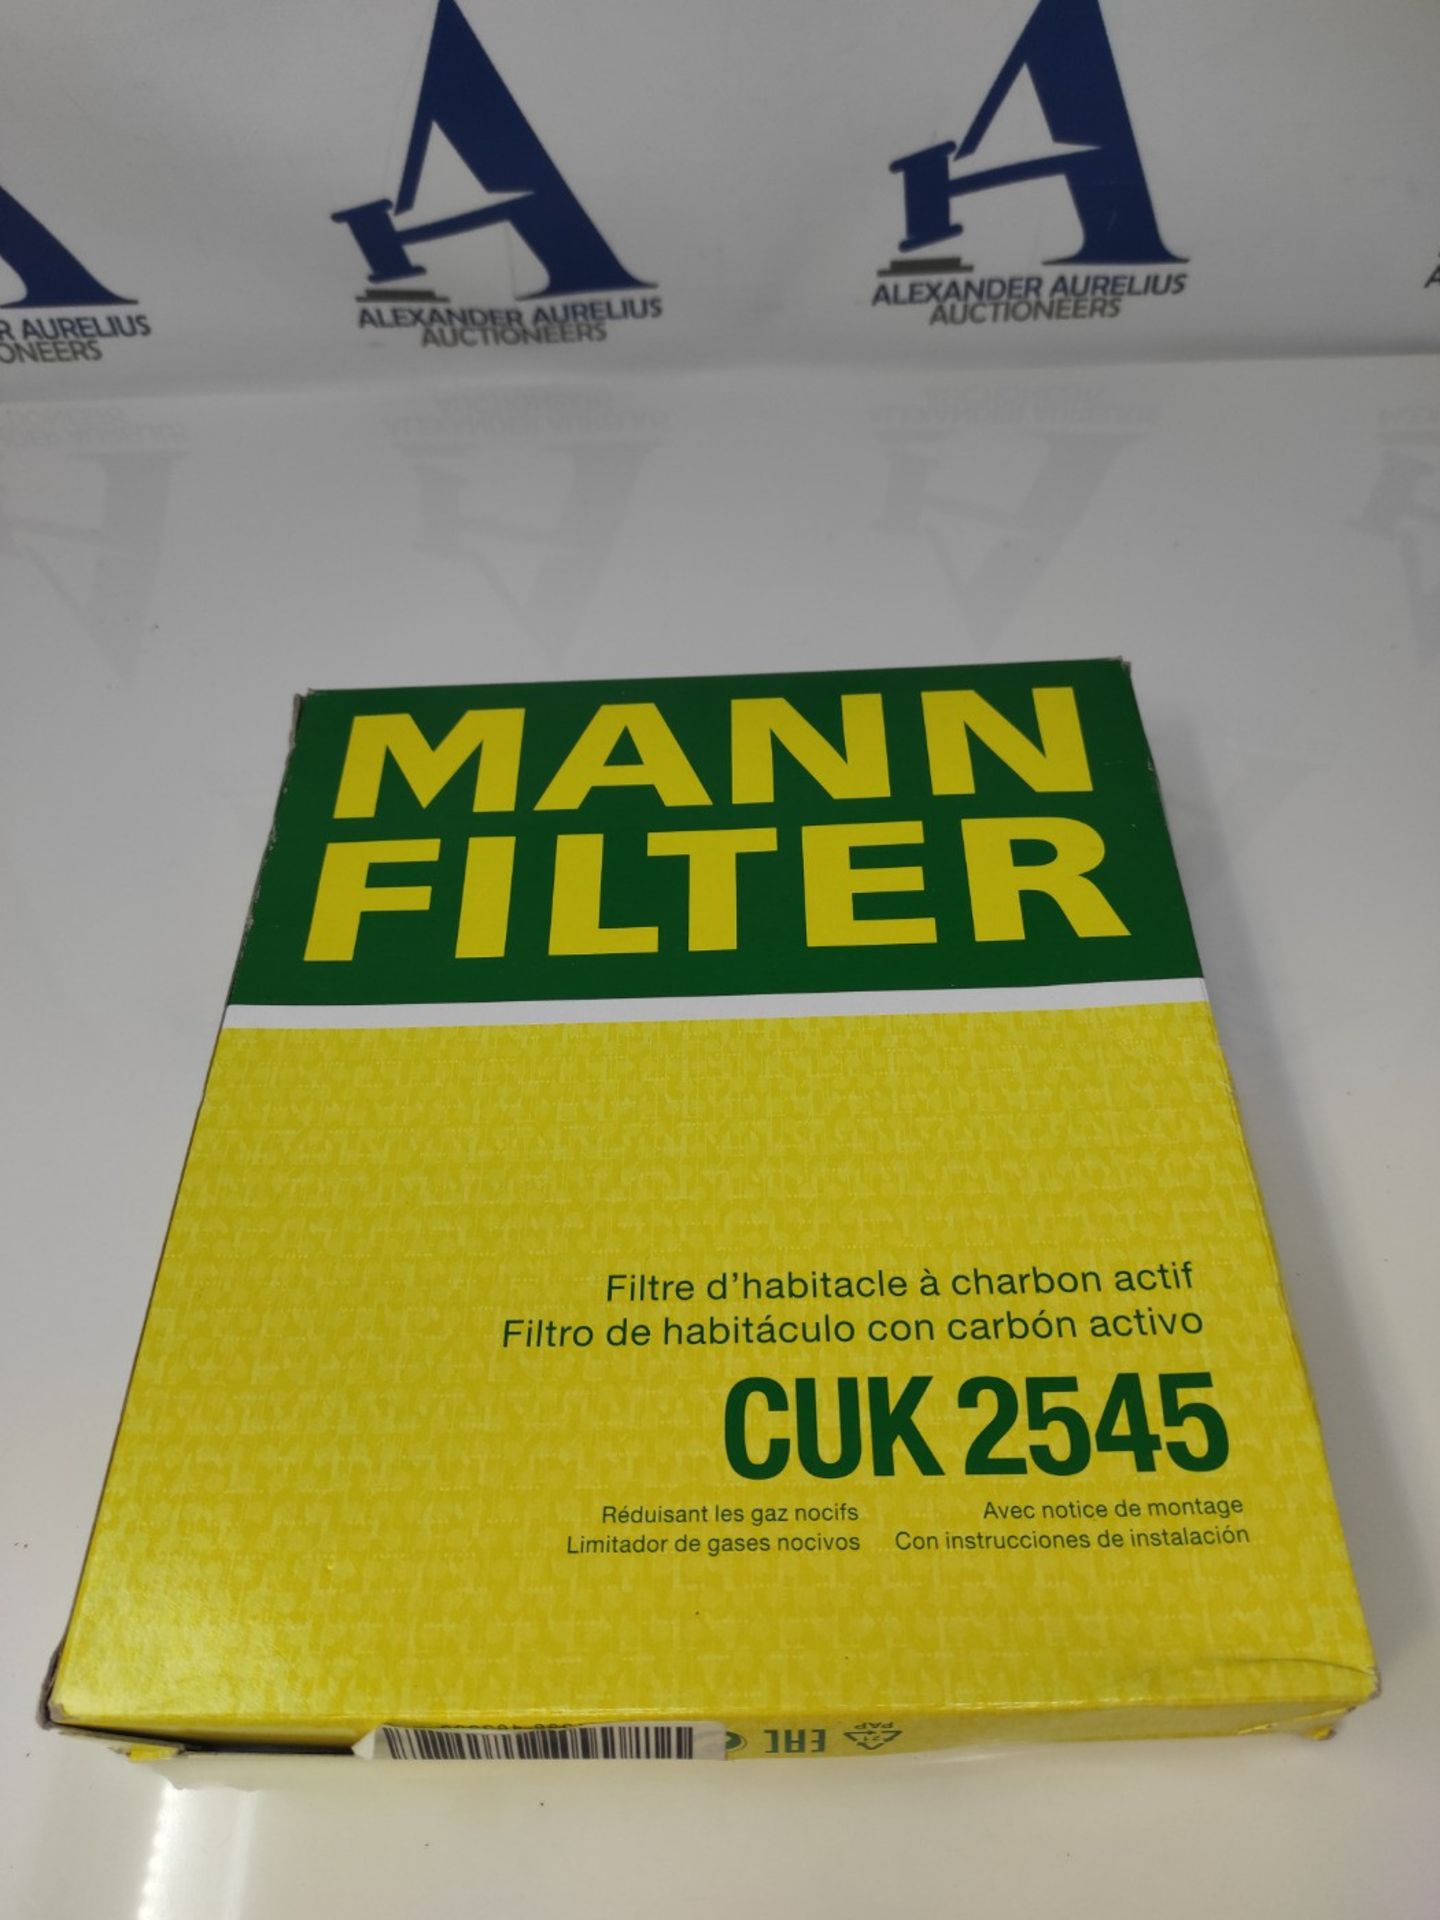 MANN-FILTER CUK 2545 Interior Filter - Pollen Filter with Activated Carbon - For Cars - Image 2 of 6